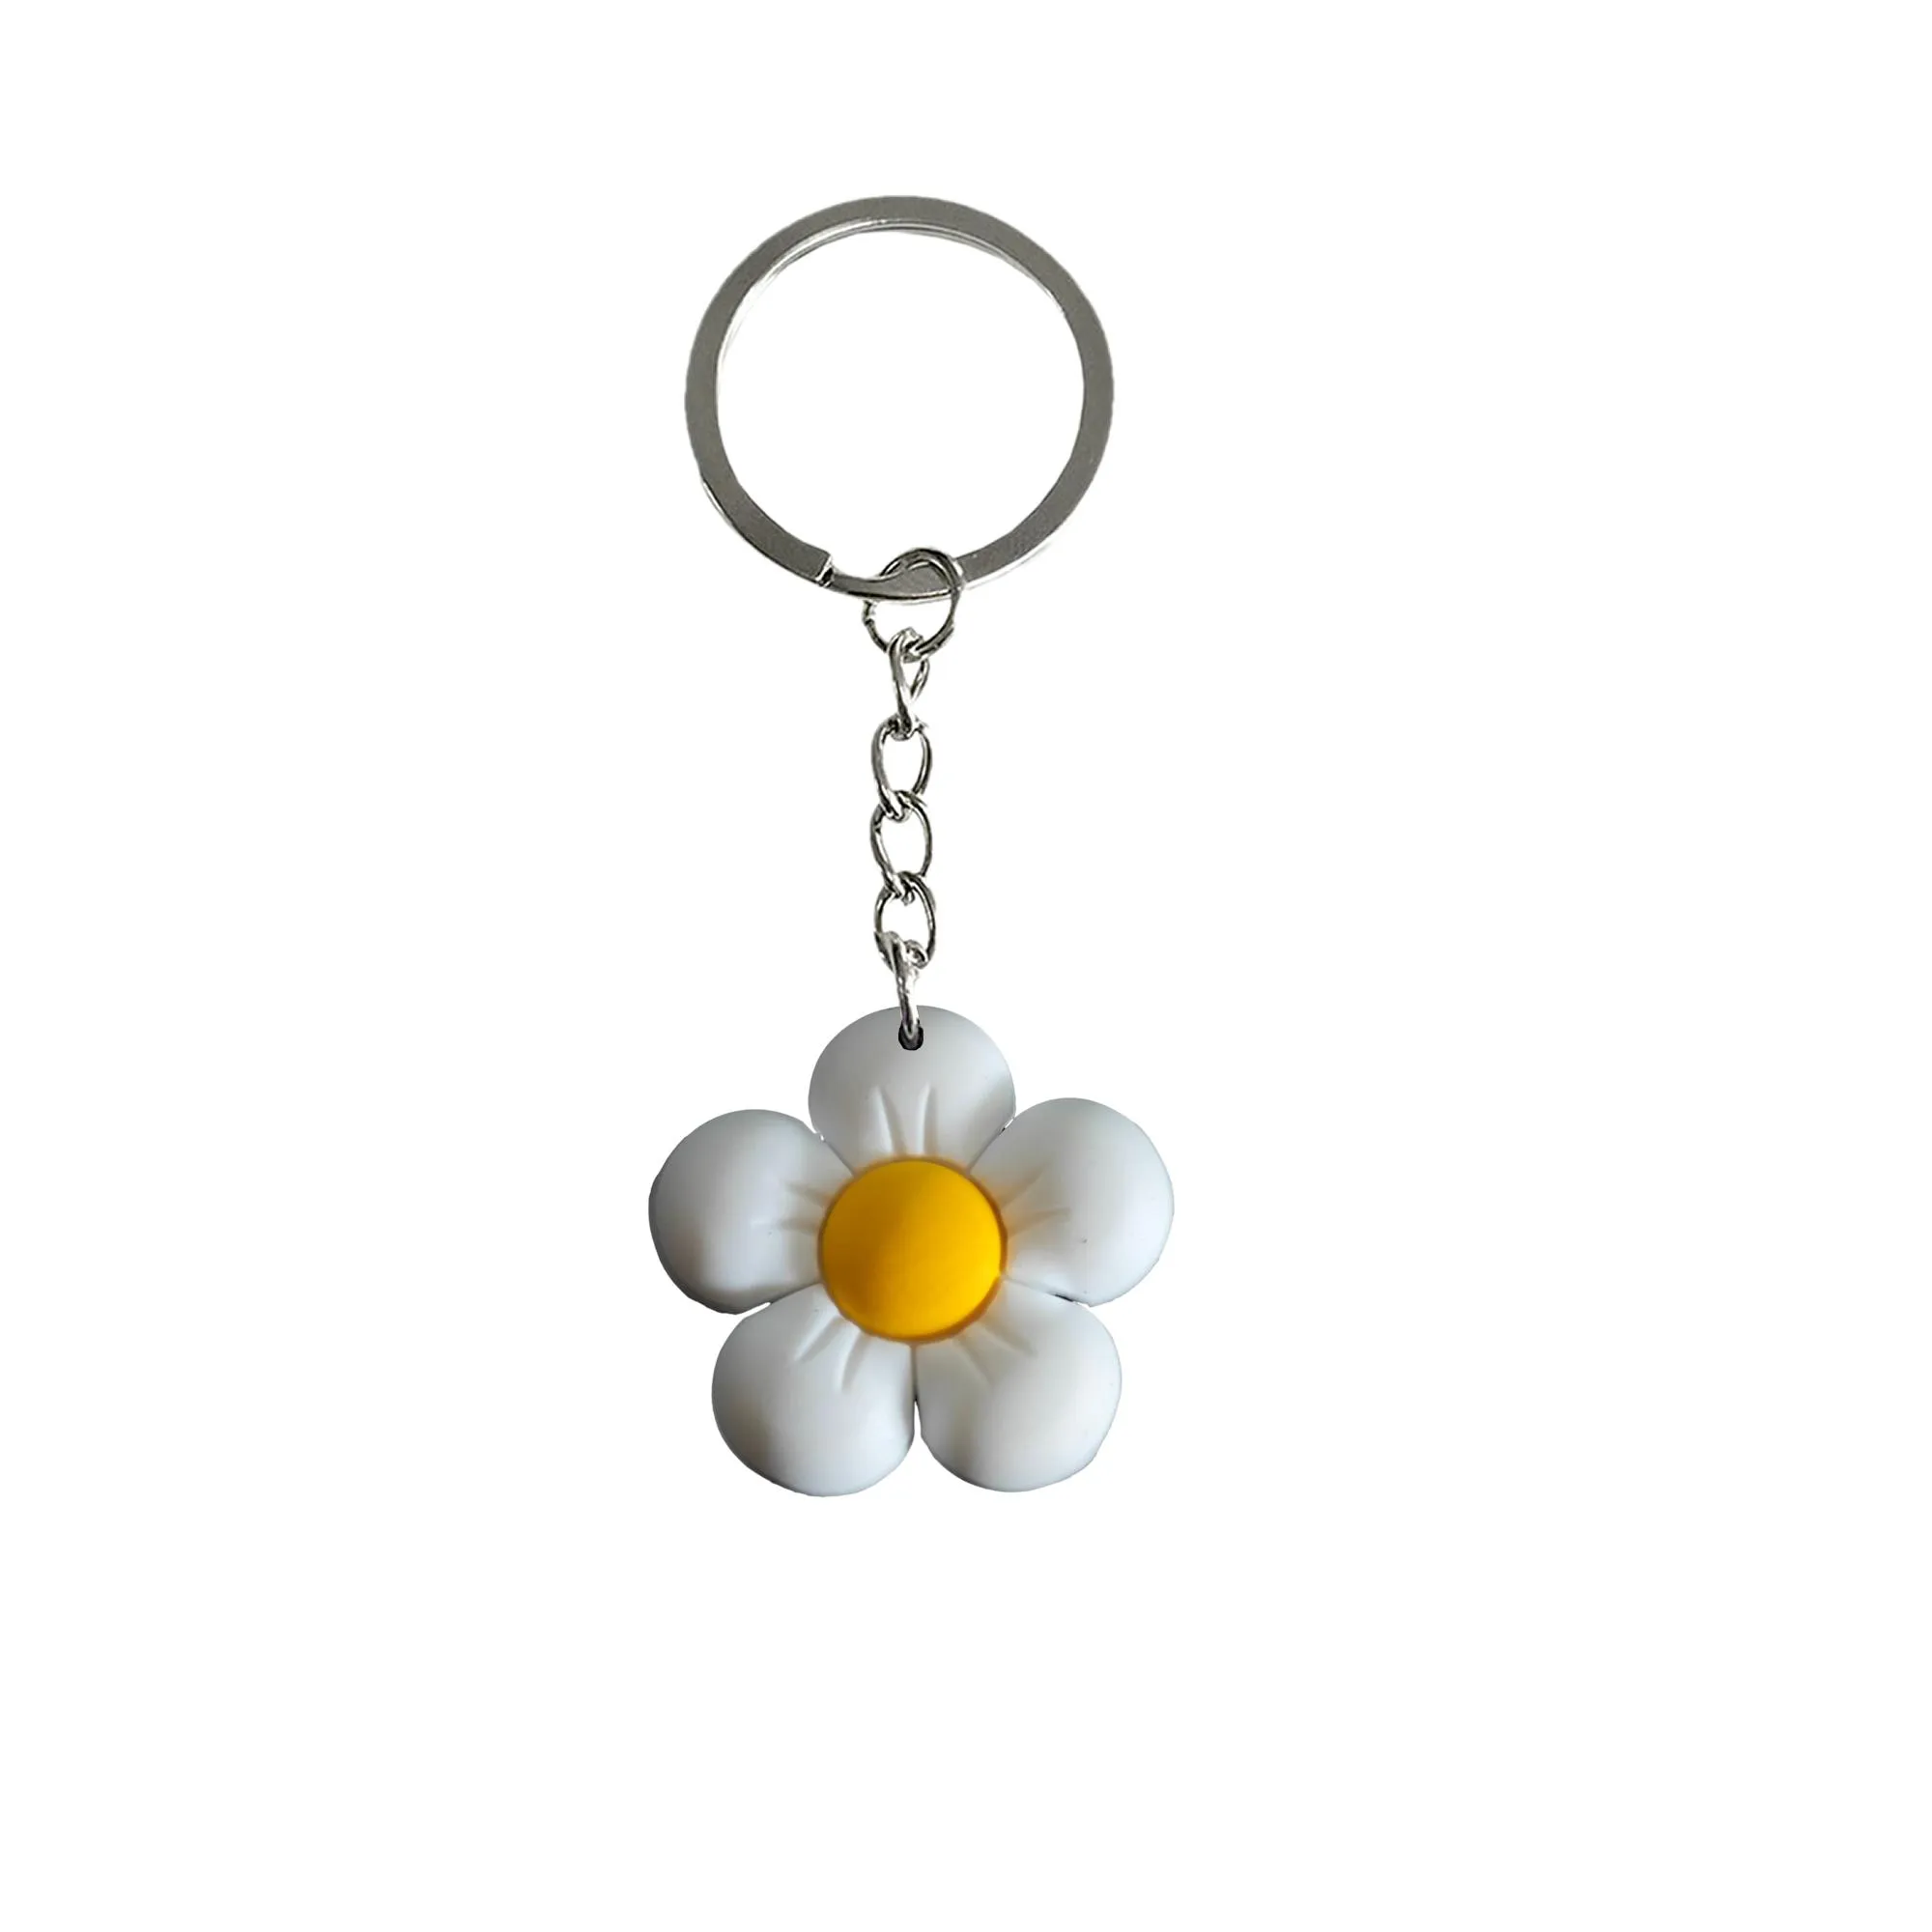 floret keychain key pendant accessories for bags keyrings kids party favors keyring suitable schoolbag classroom school day birthday supplies gift keychains girls boys